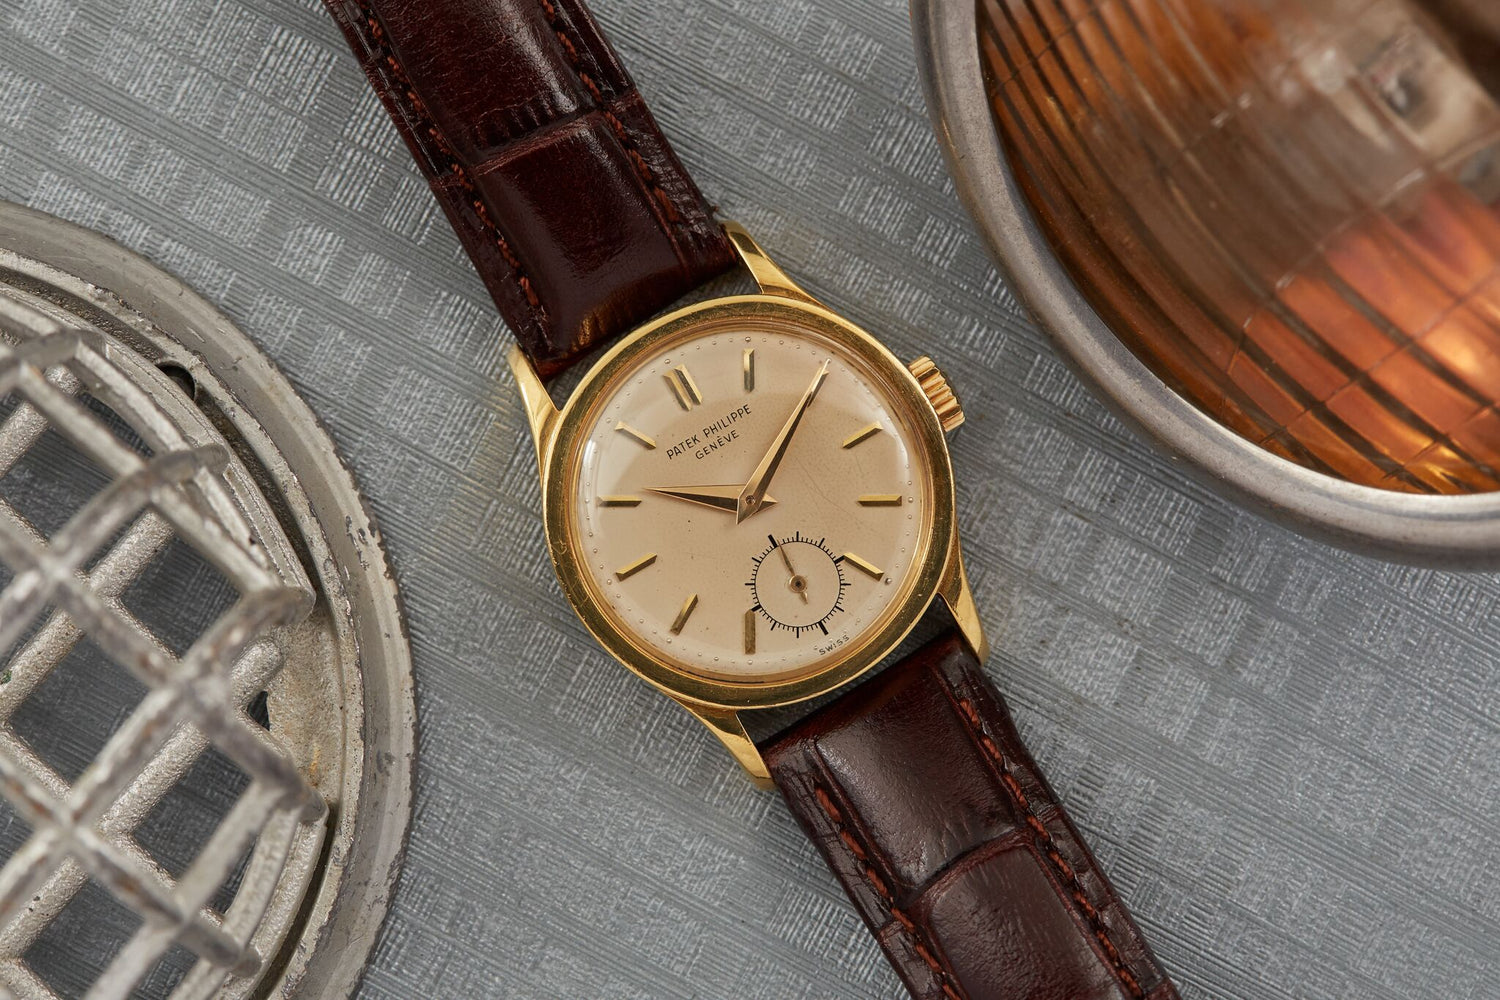 Patek Philippe - Signed and Numbered Yellow Gold Tone Calatrava – Every  Watch Has a Story